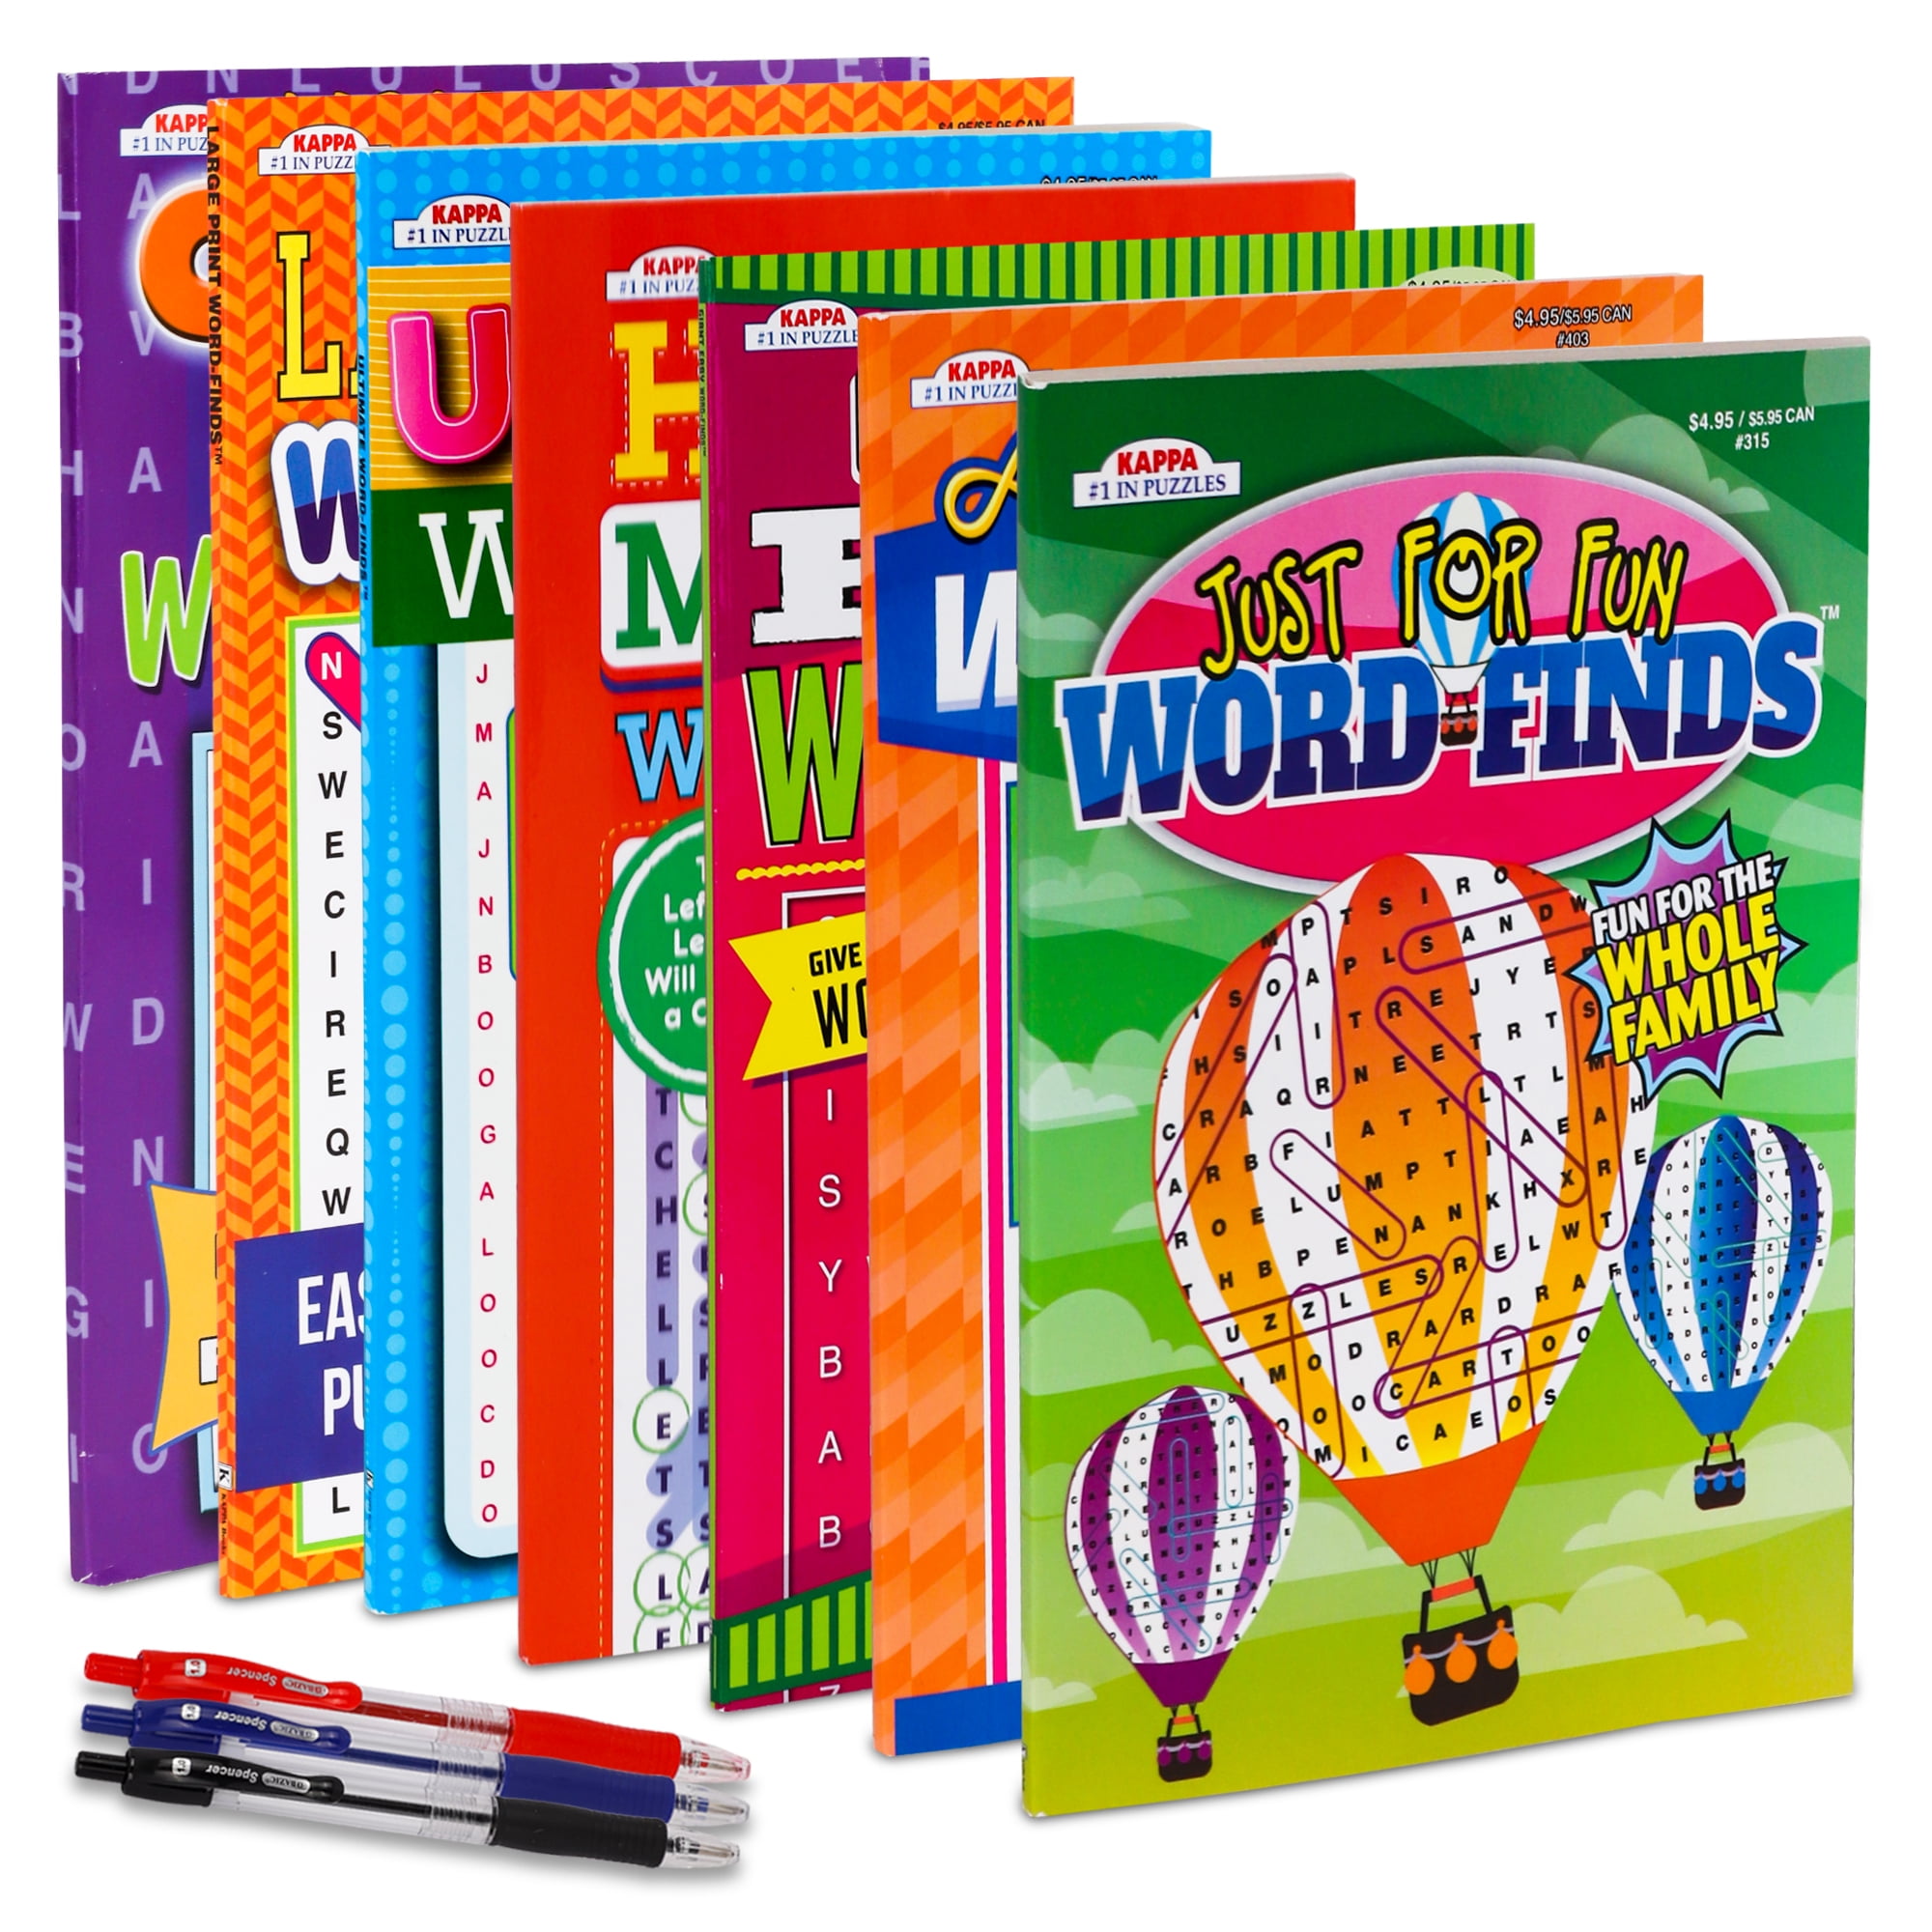 Puzzle Book Gift Set, Felt Storage Bin Word Search Books Puzzle Activity  Set Adult Coloring Books Word Find Book Adult Puzzles 